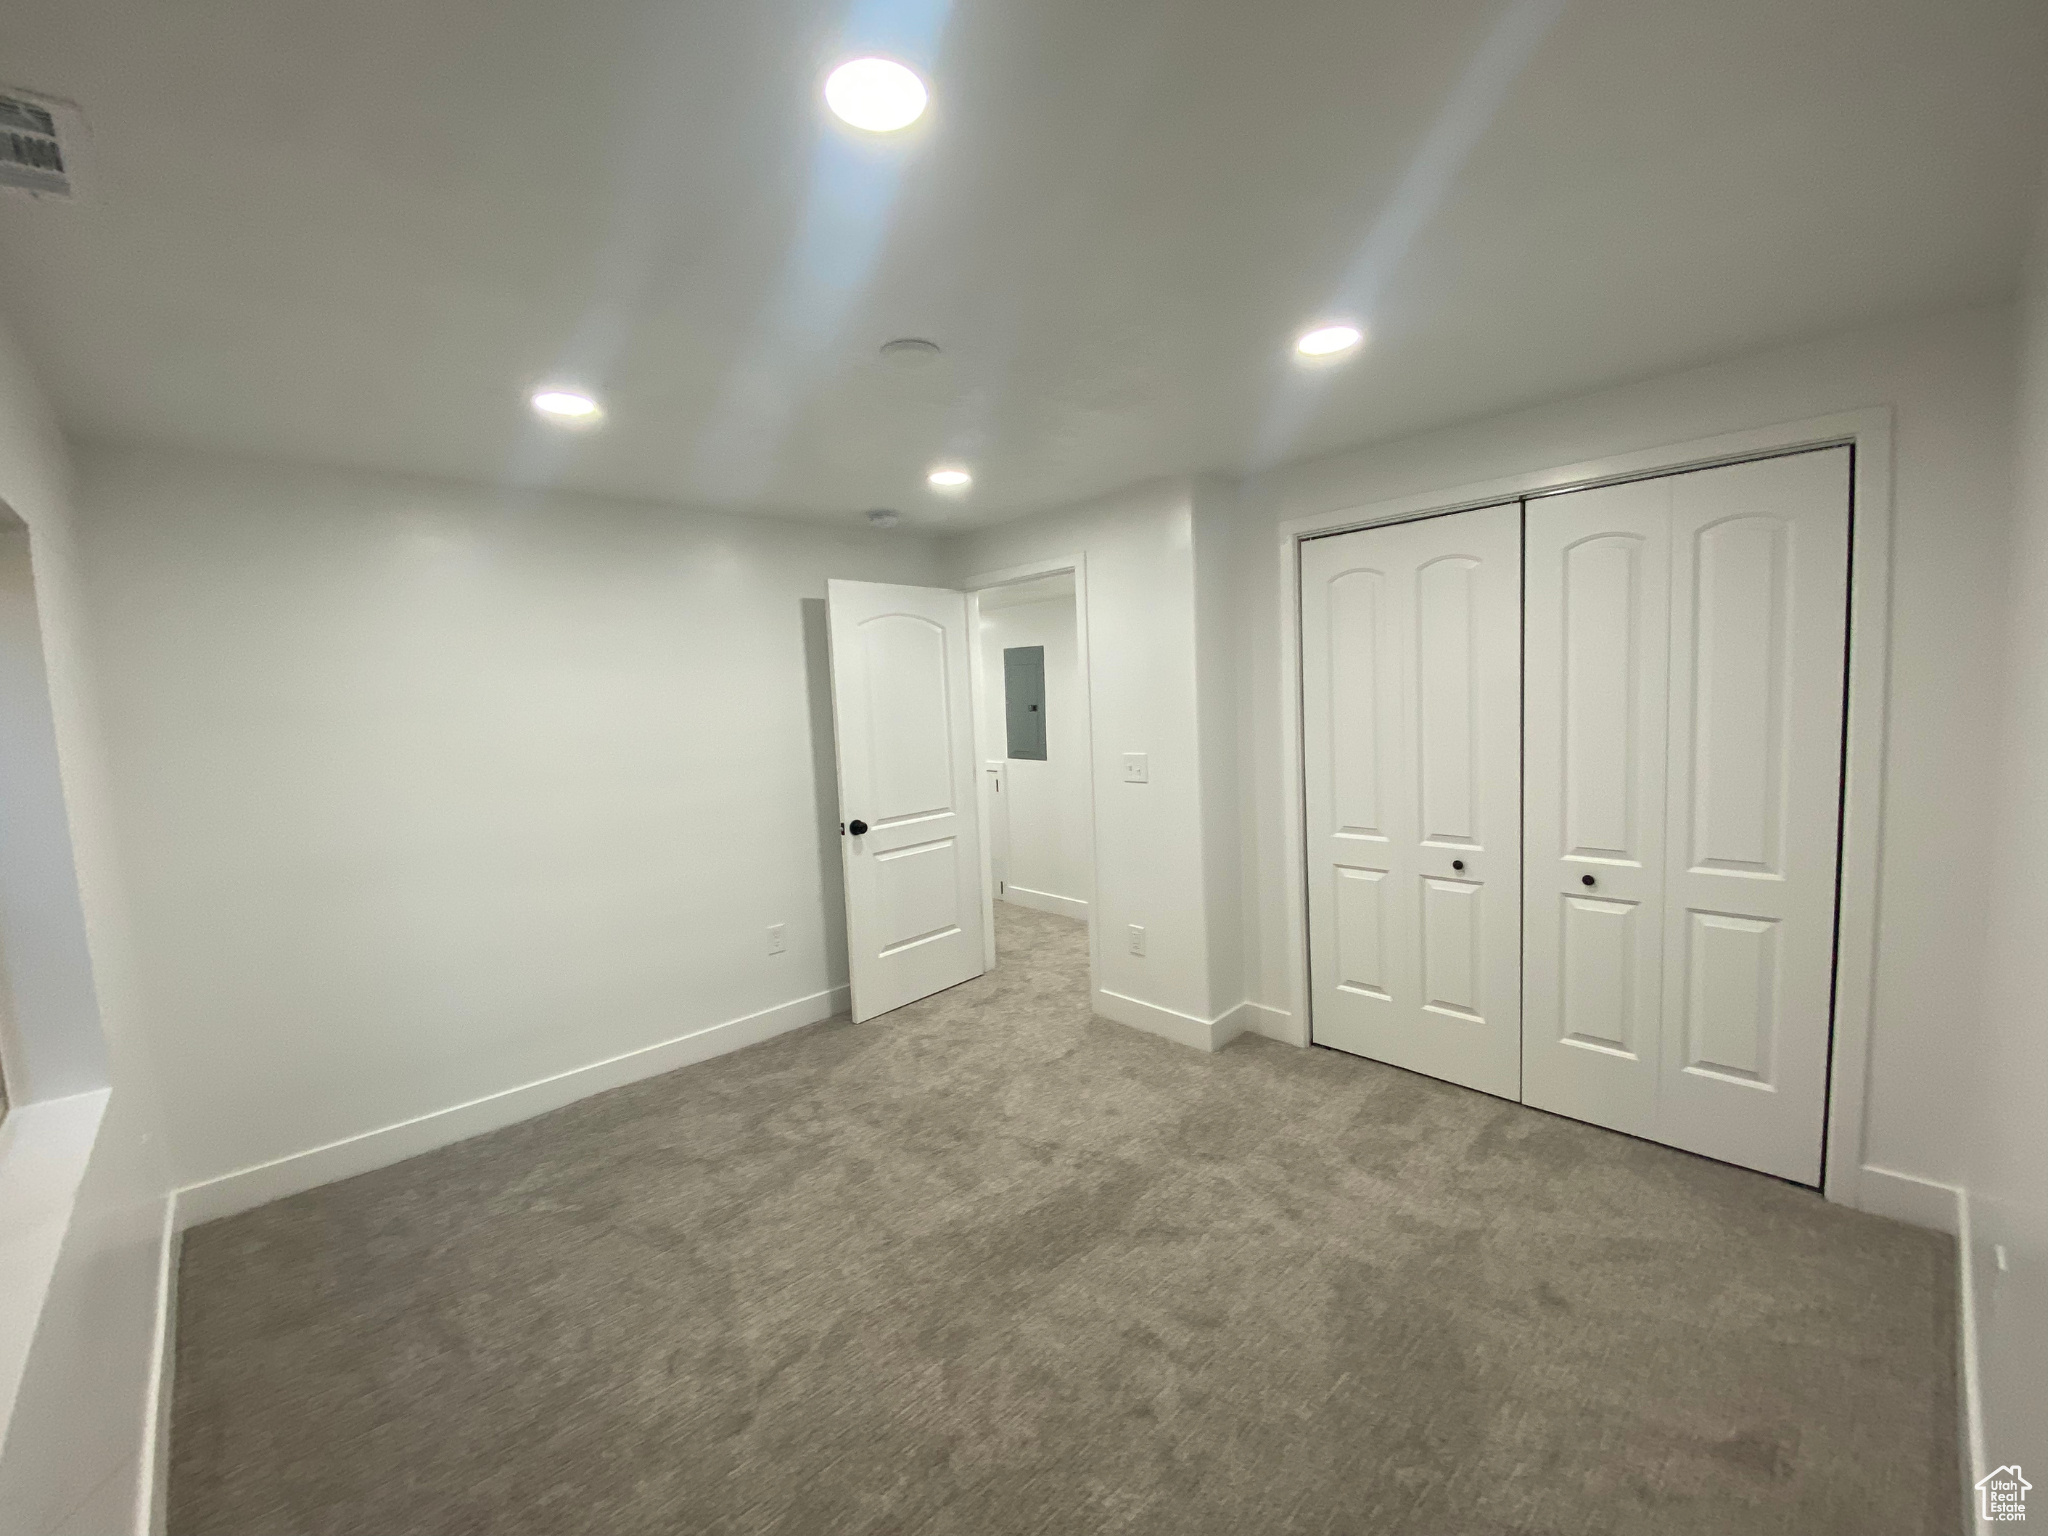 Unfurnished bedroom with a closet and carpet floors